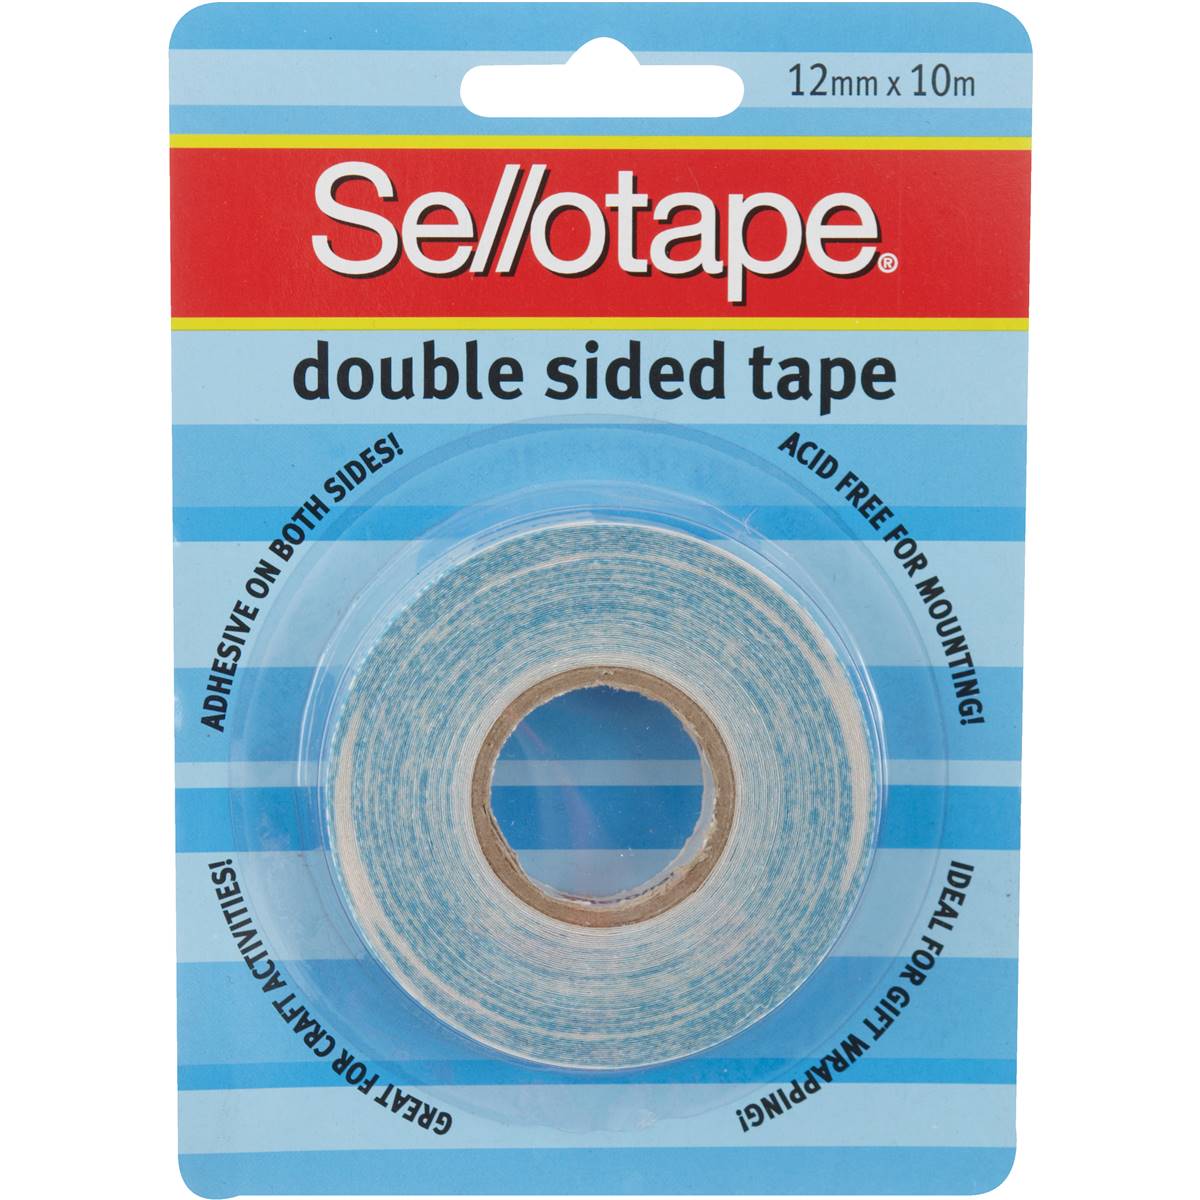 Sellotape Tape Double Sided 12mmx10m 1 Pack